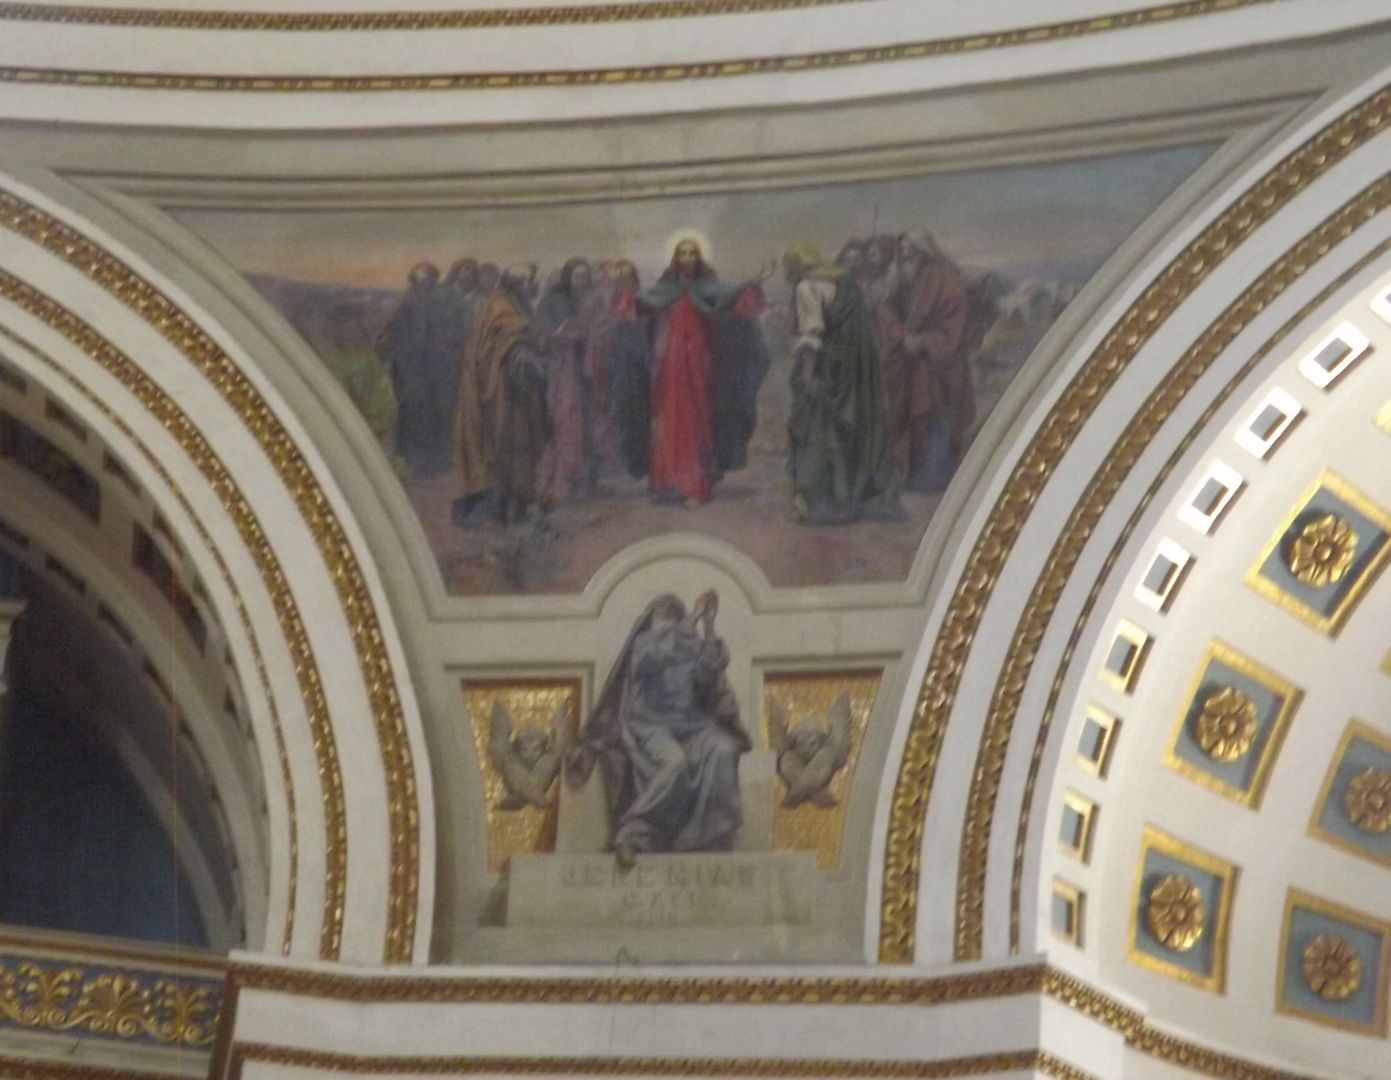 Painting by Giuseppe Cali of Christ and the Apostles above the entrance to the church which was hit by the bomb.